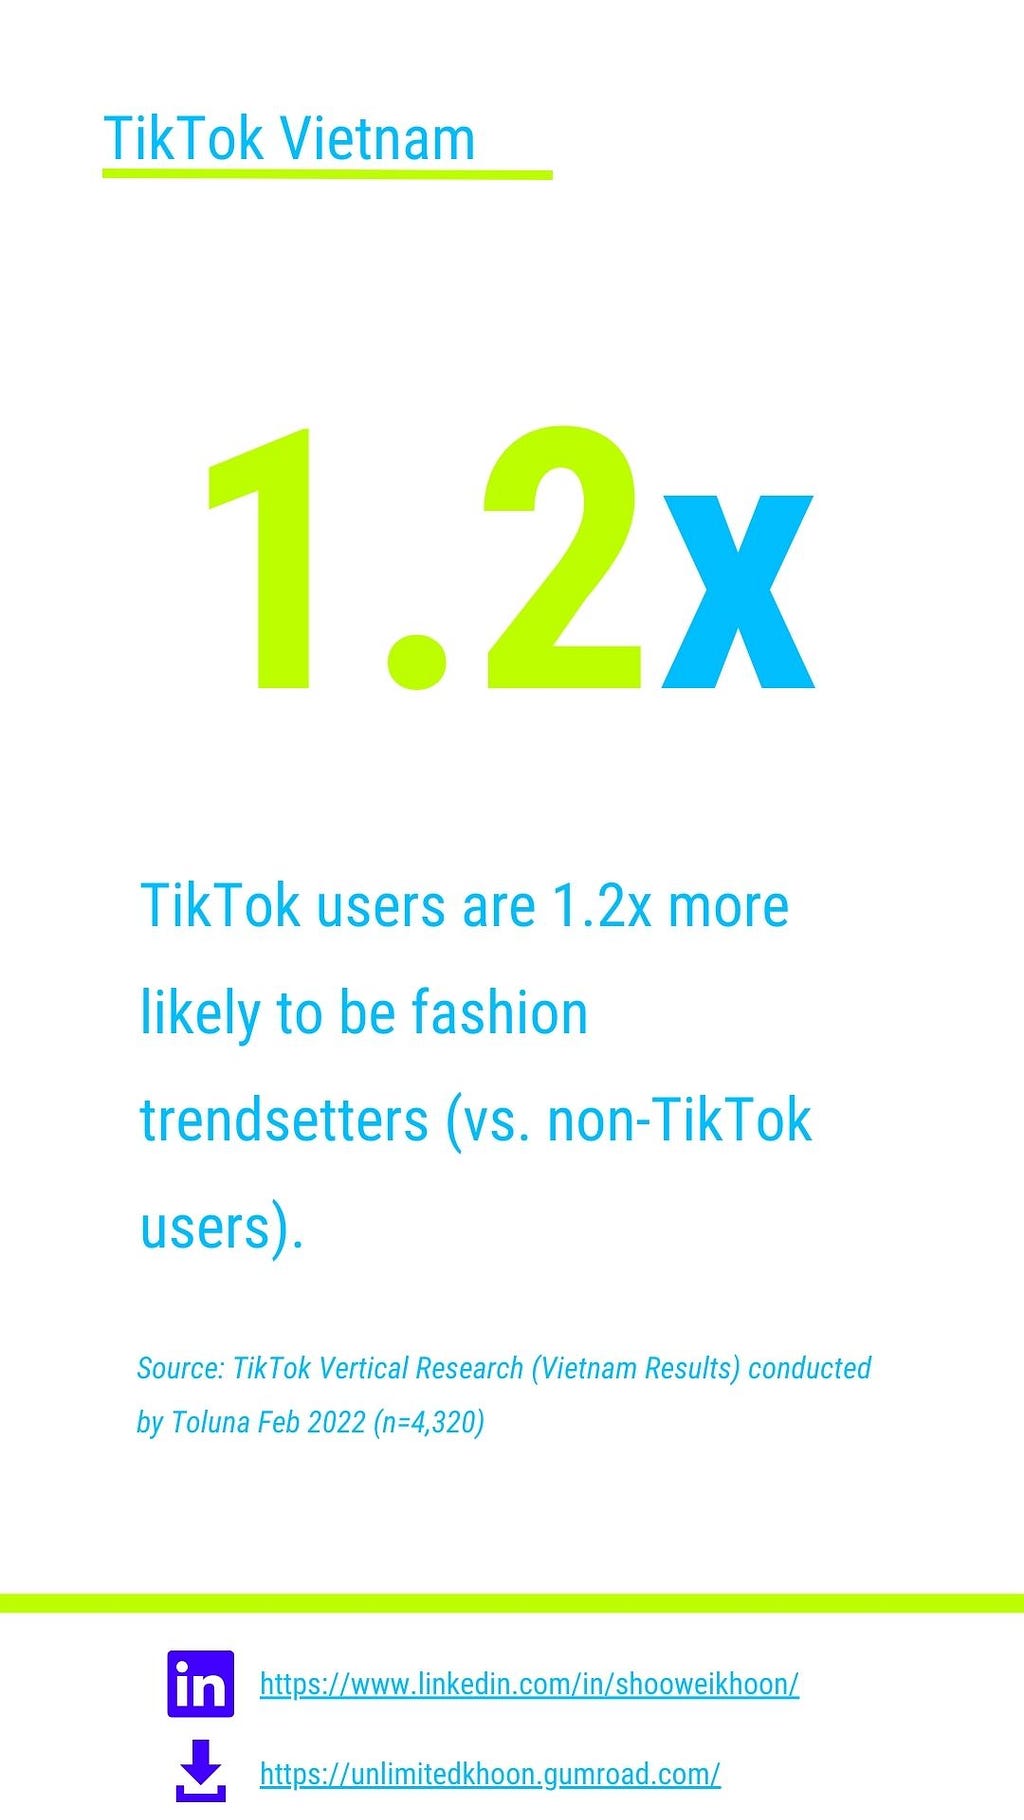 VN TikTok users are 1.2x more likely to be fashion trendsetters